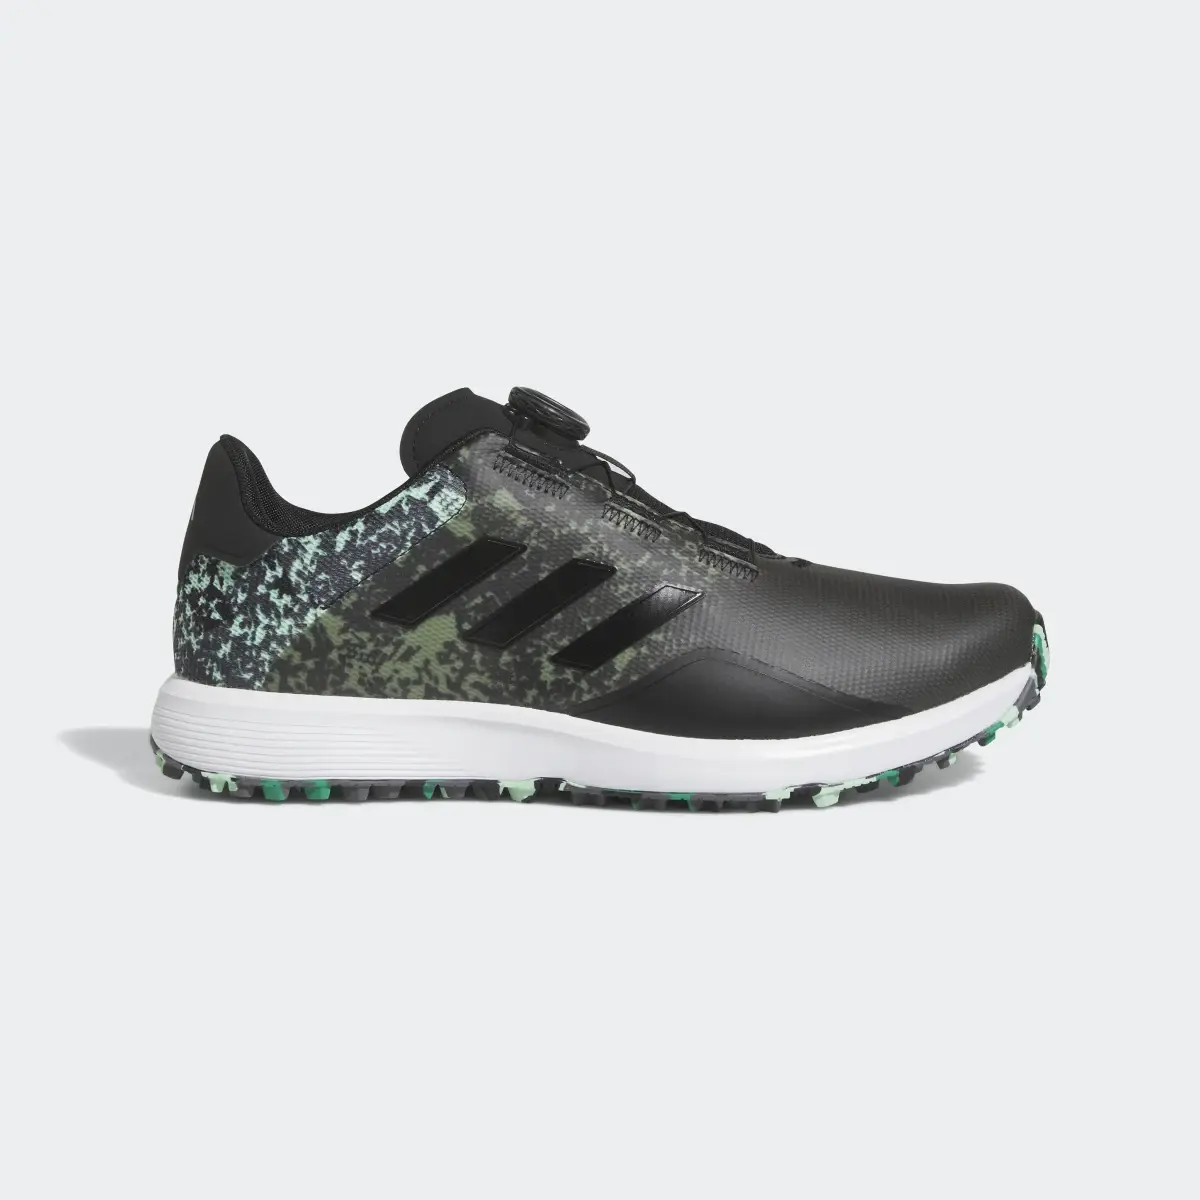 Adidas S2G SL 23 Wide Golf Shoes. 2